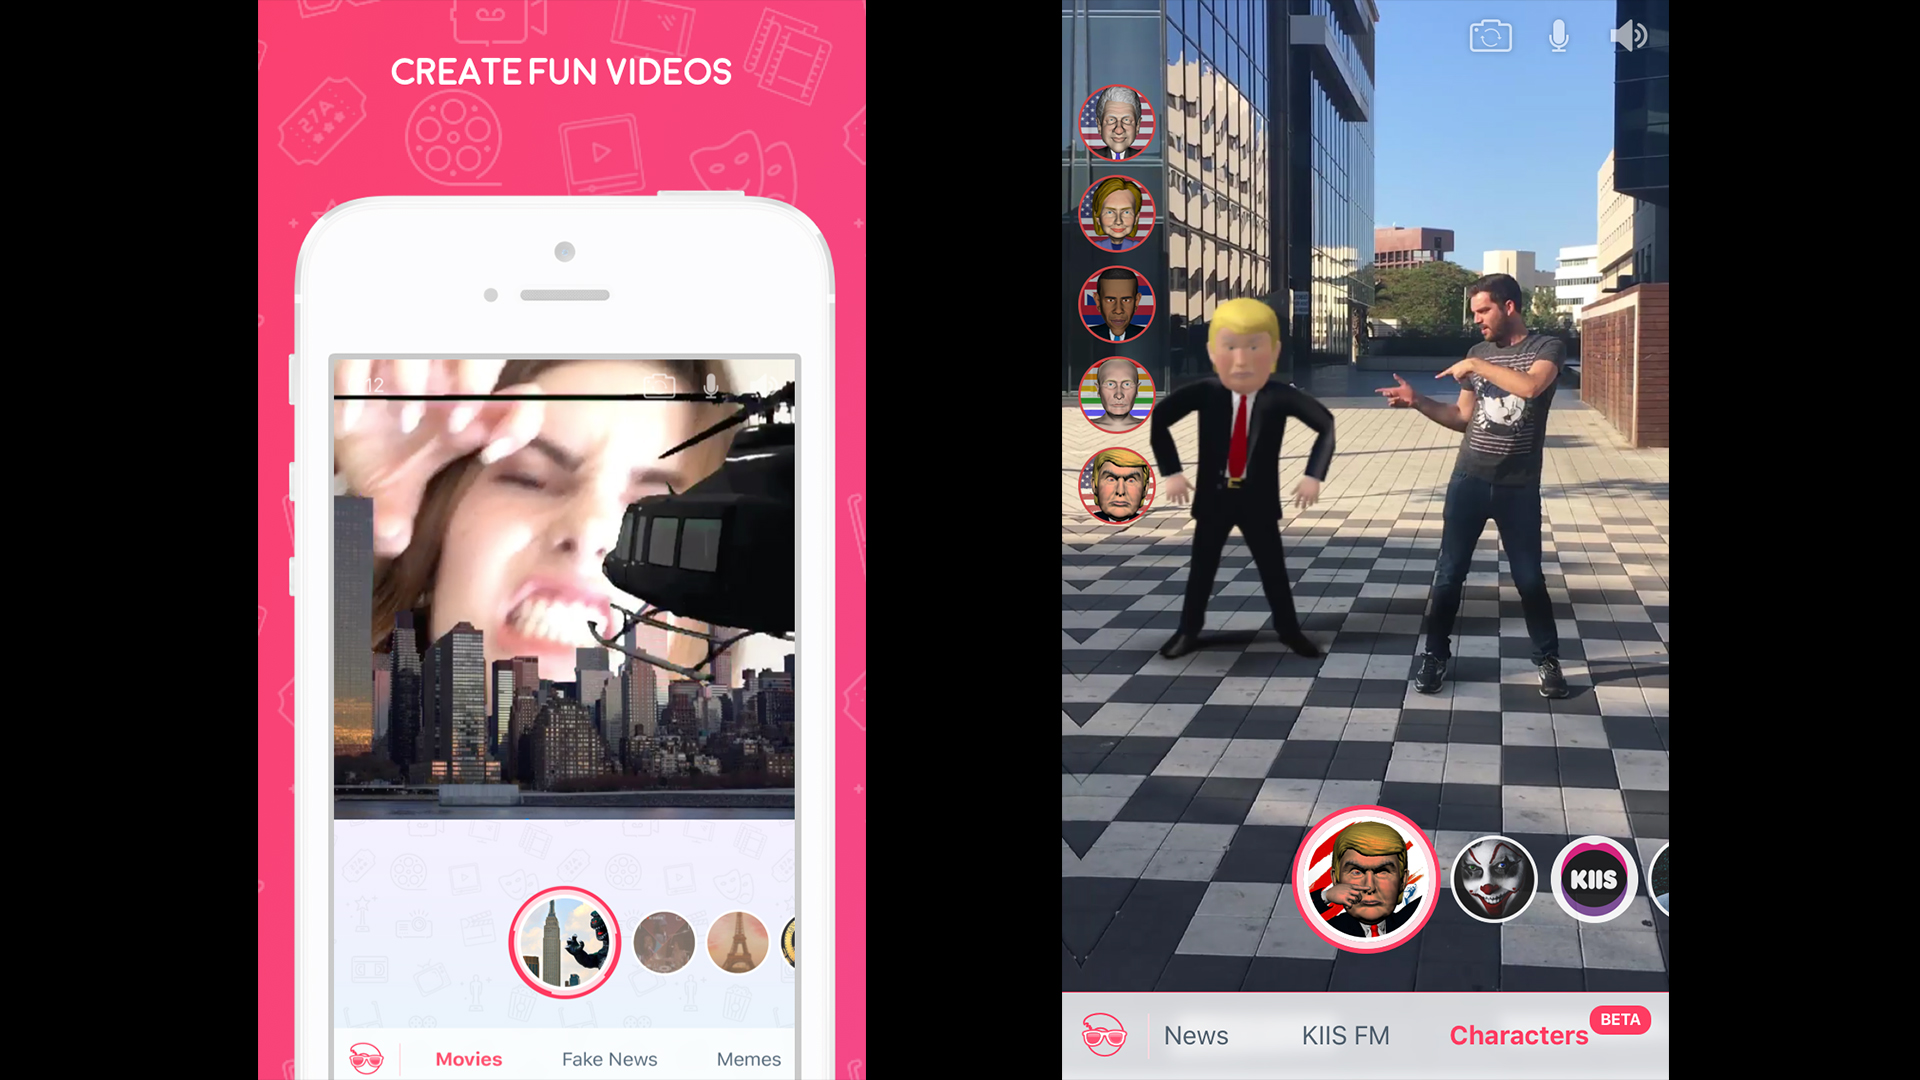 You can dance with Trump with this new Israeli app | The Times of Israel